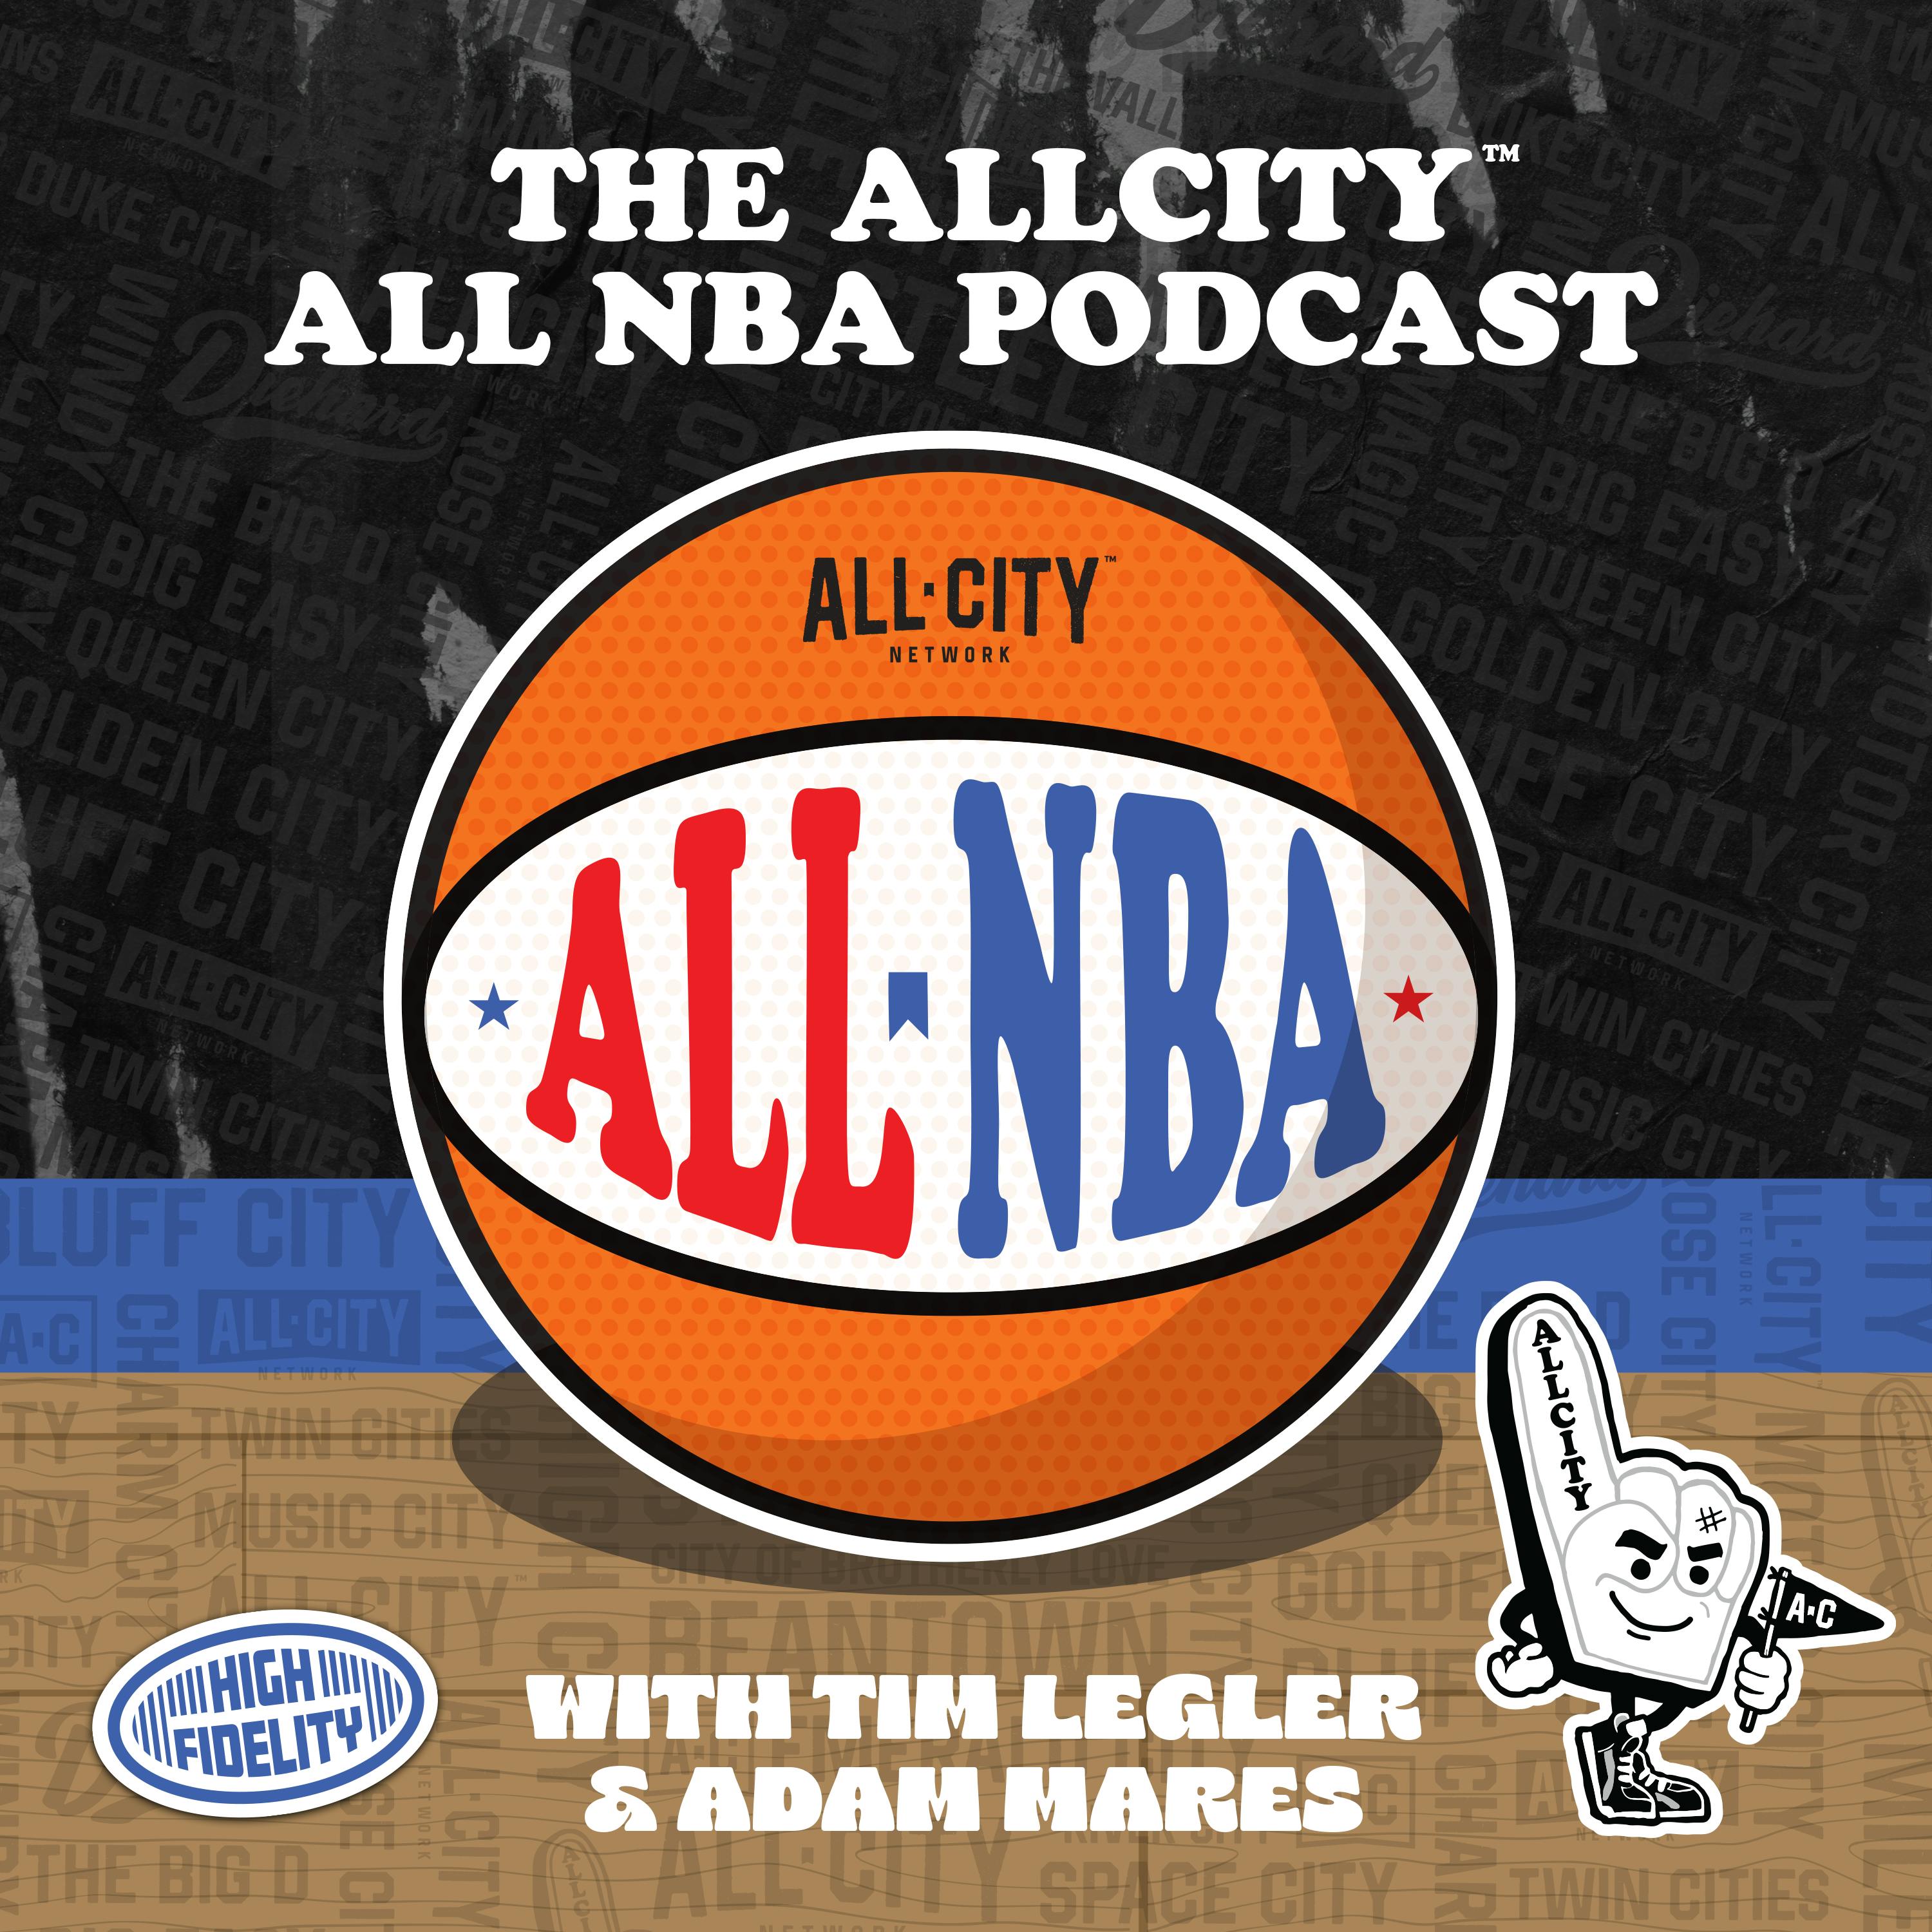 The ALL NBA Podcast: Giannis made a triple-double in the Bucks' first game after Griffin was fired